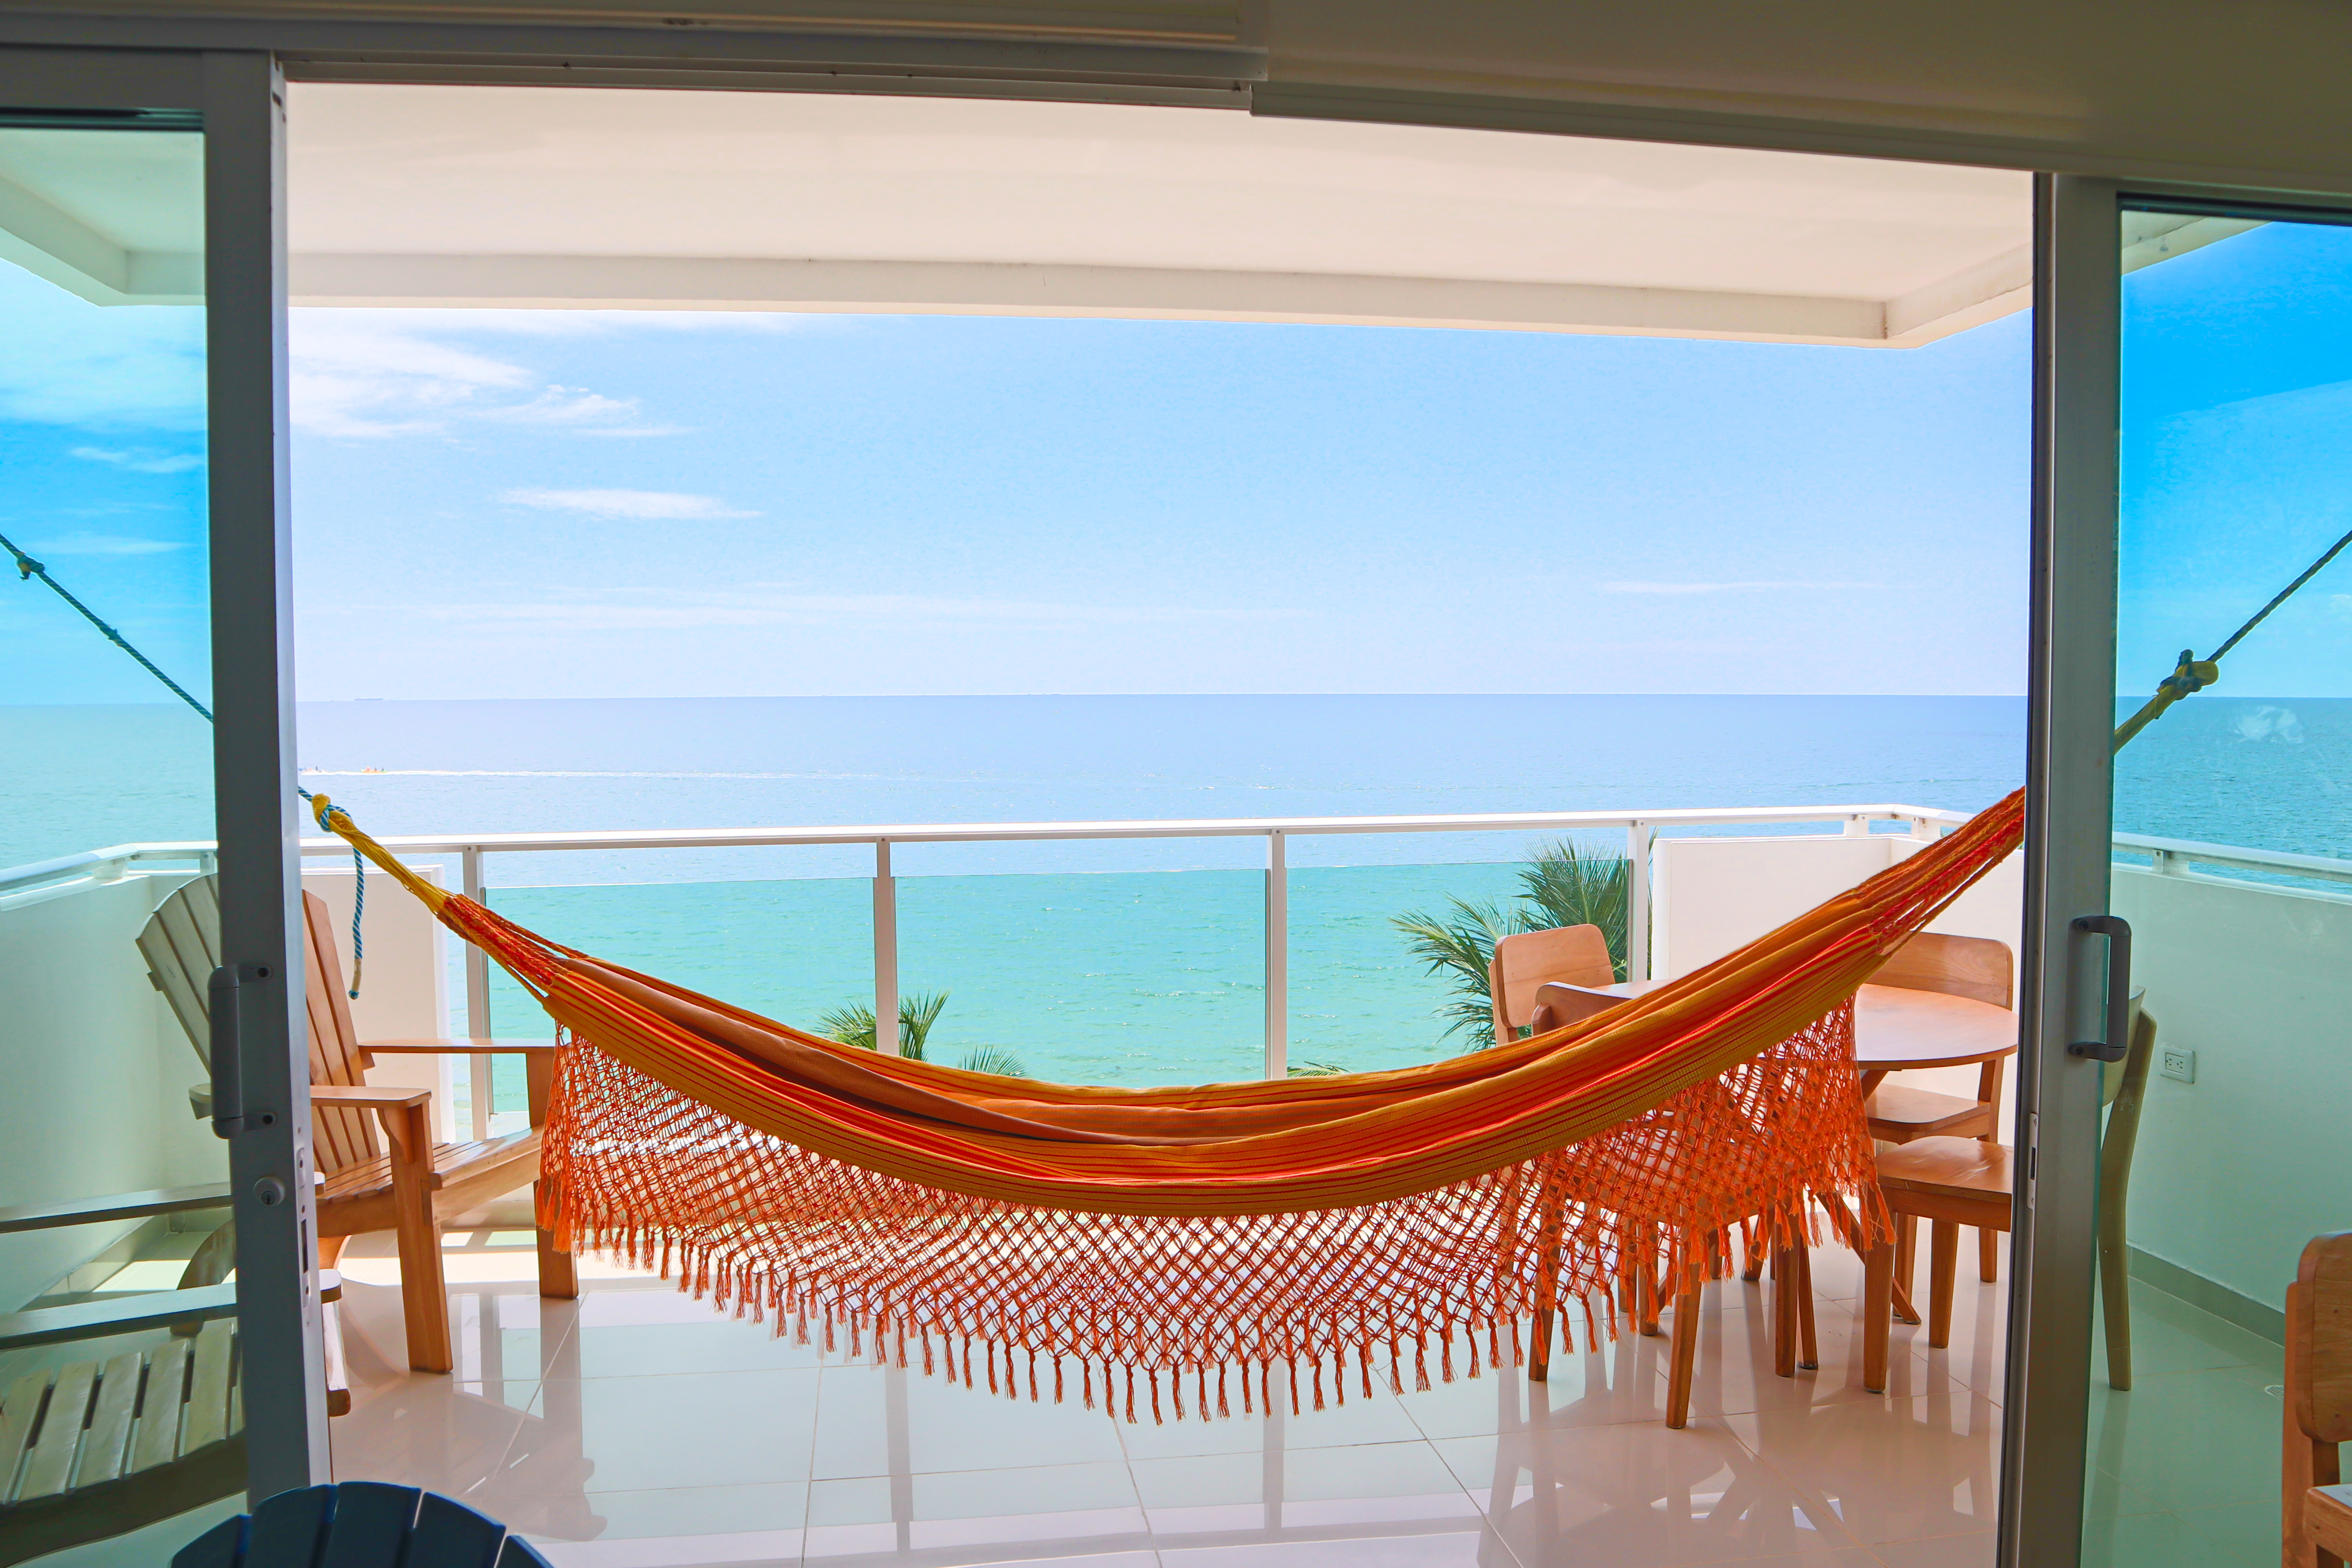 View of a hammock in a balcony of an apartment in Coveñas, Colombia, with a view of the Caribbean sea in the back